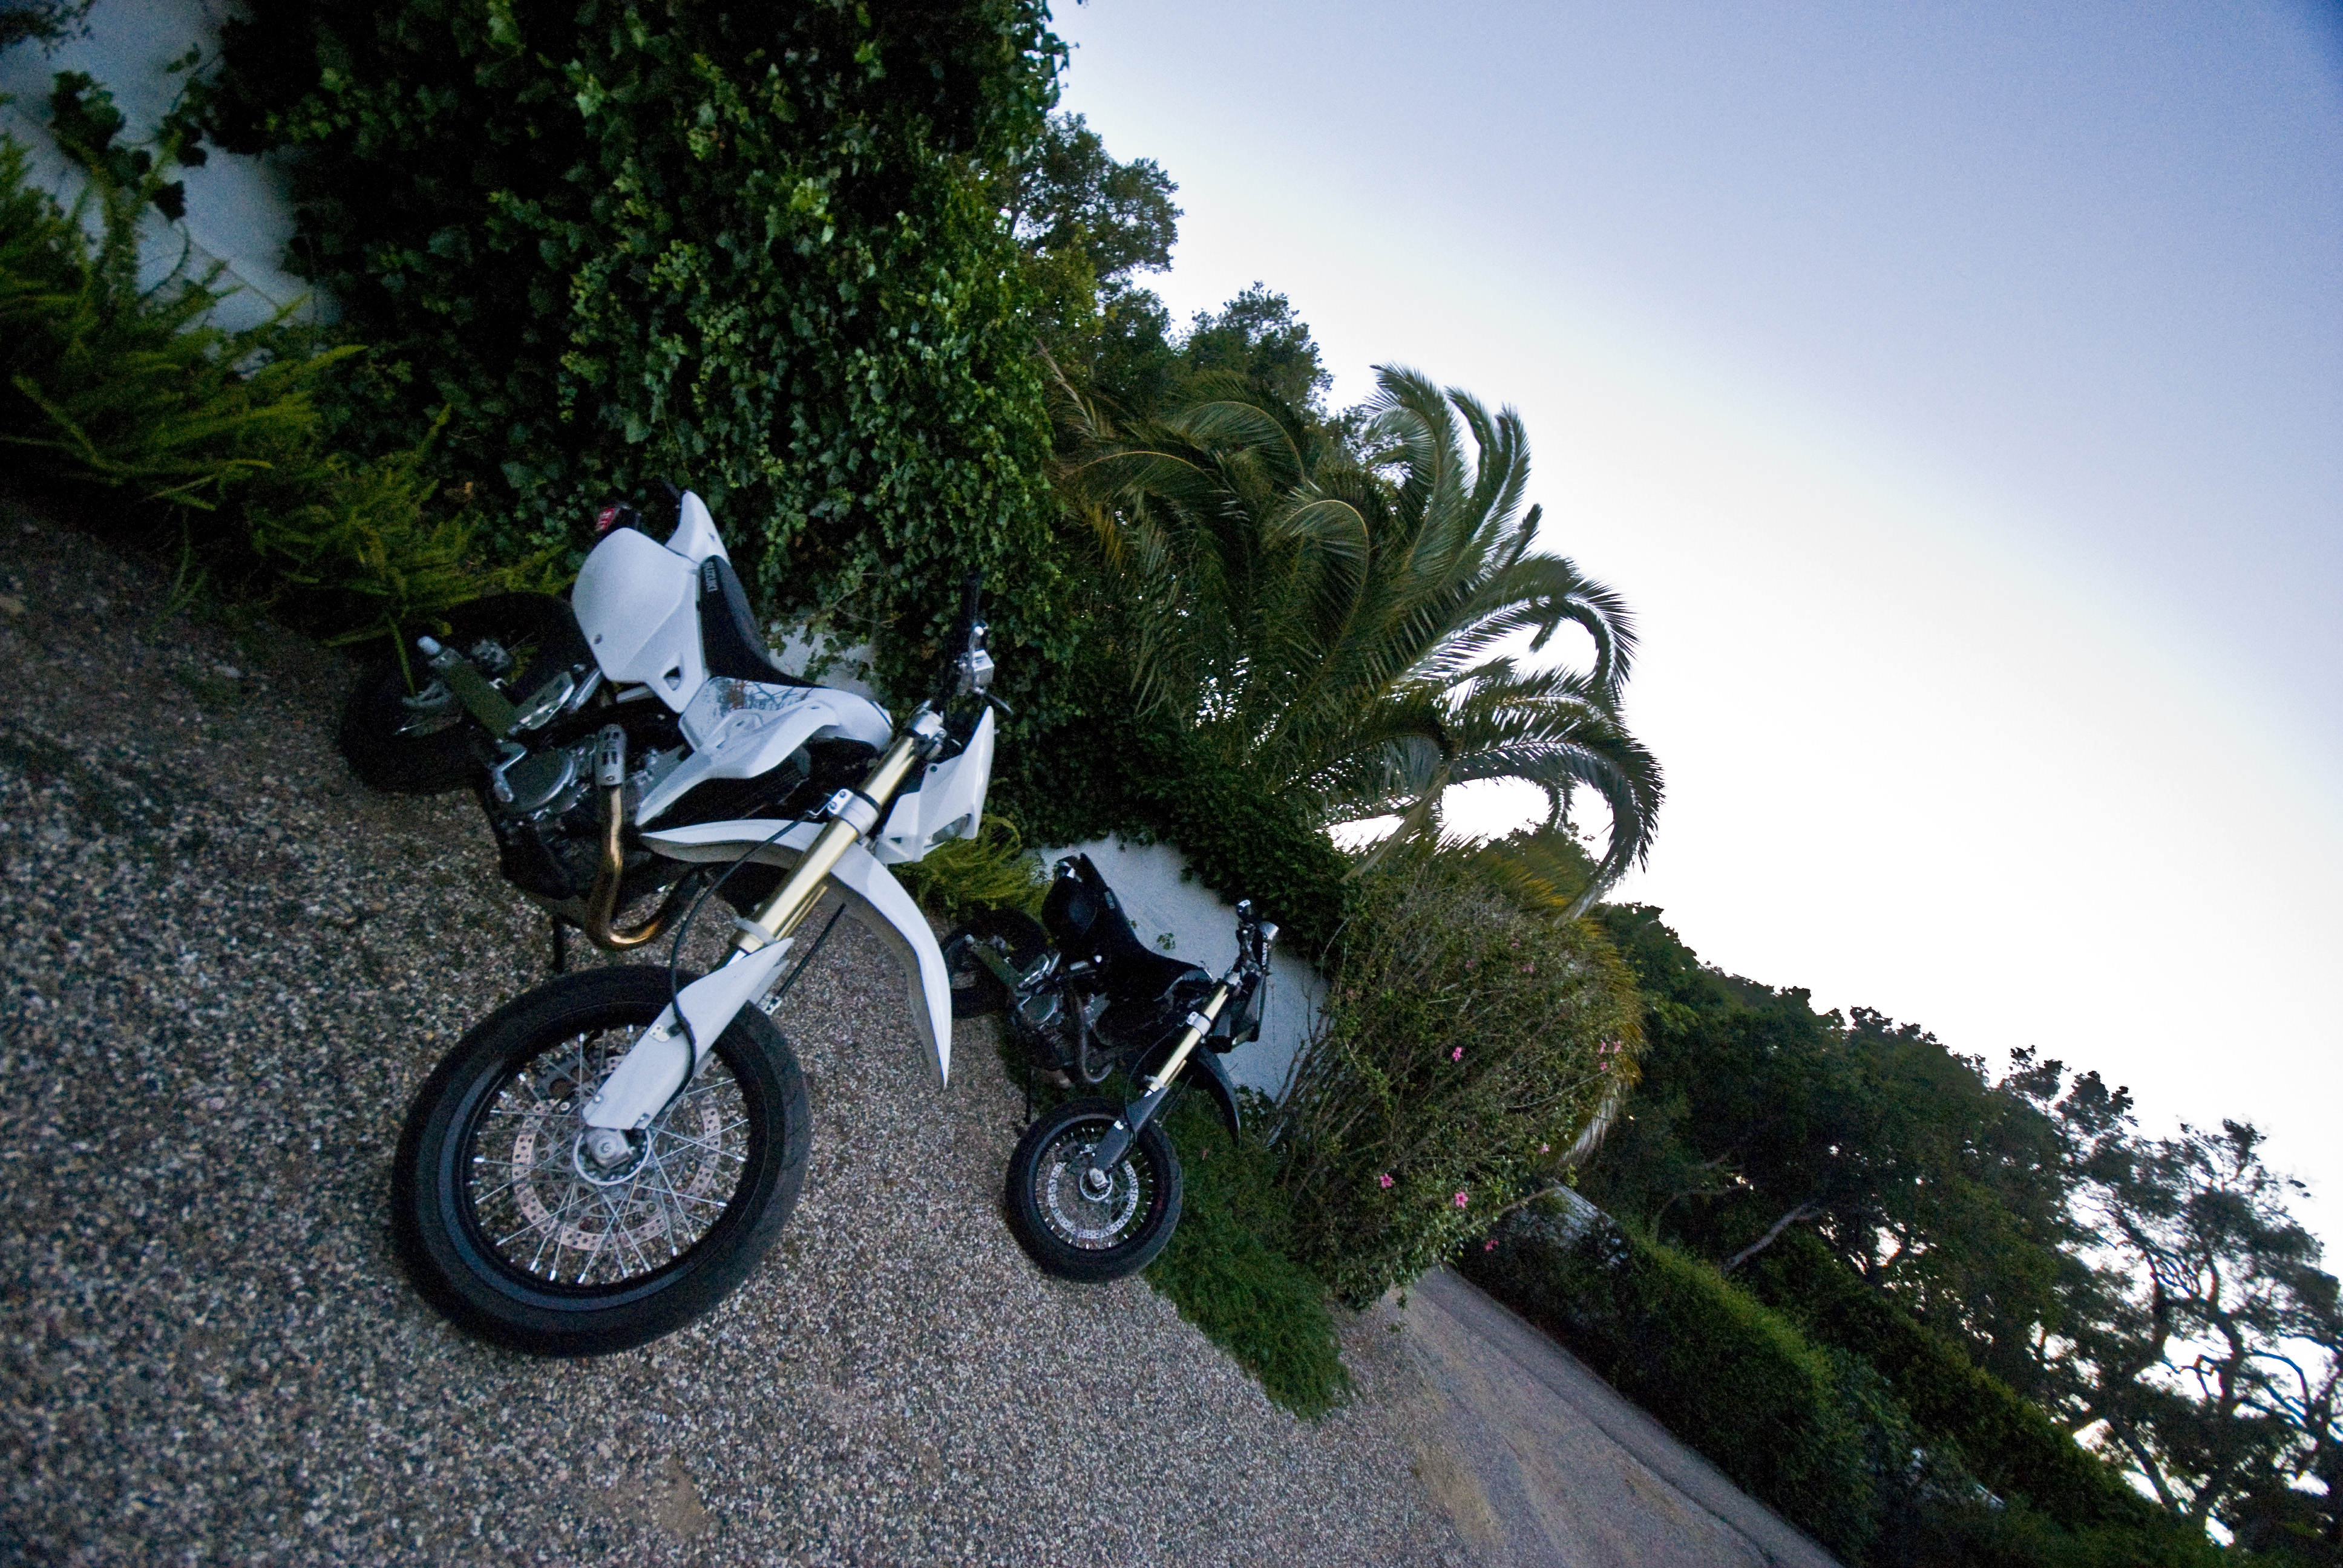 Nothing says summer vacation quite like the sound of a DRZ400 SuperMoto - Nick Salsbury